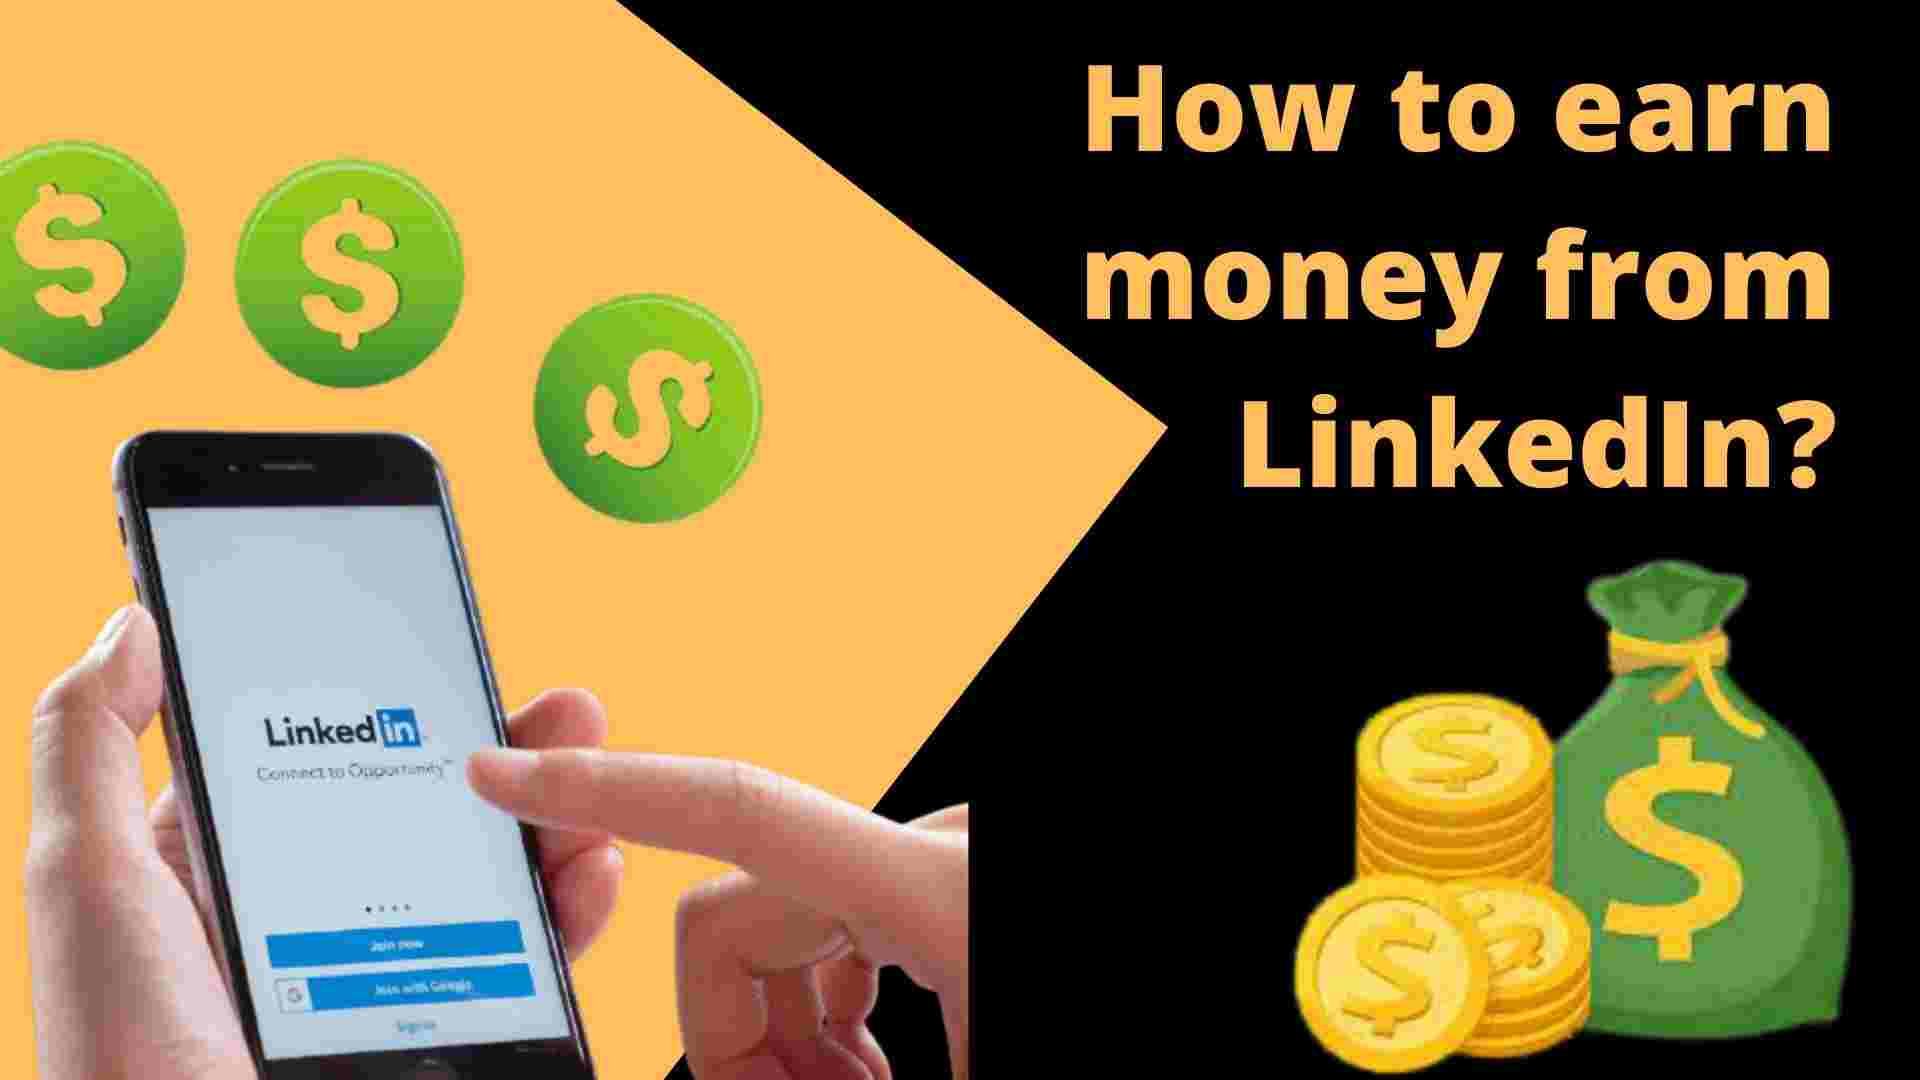 How to earn money from LinkedIn